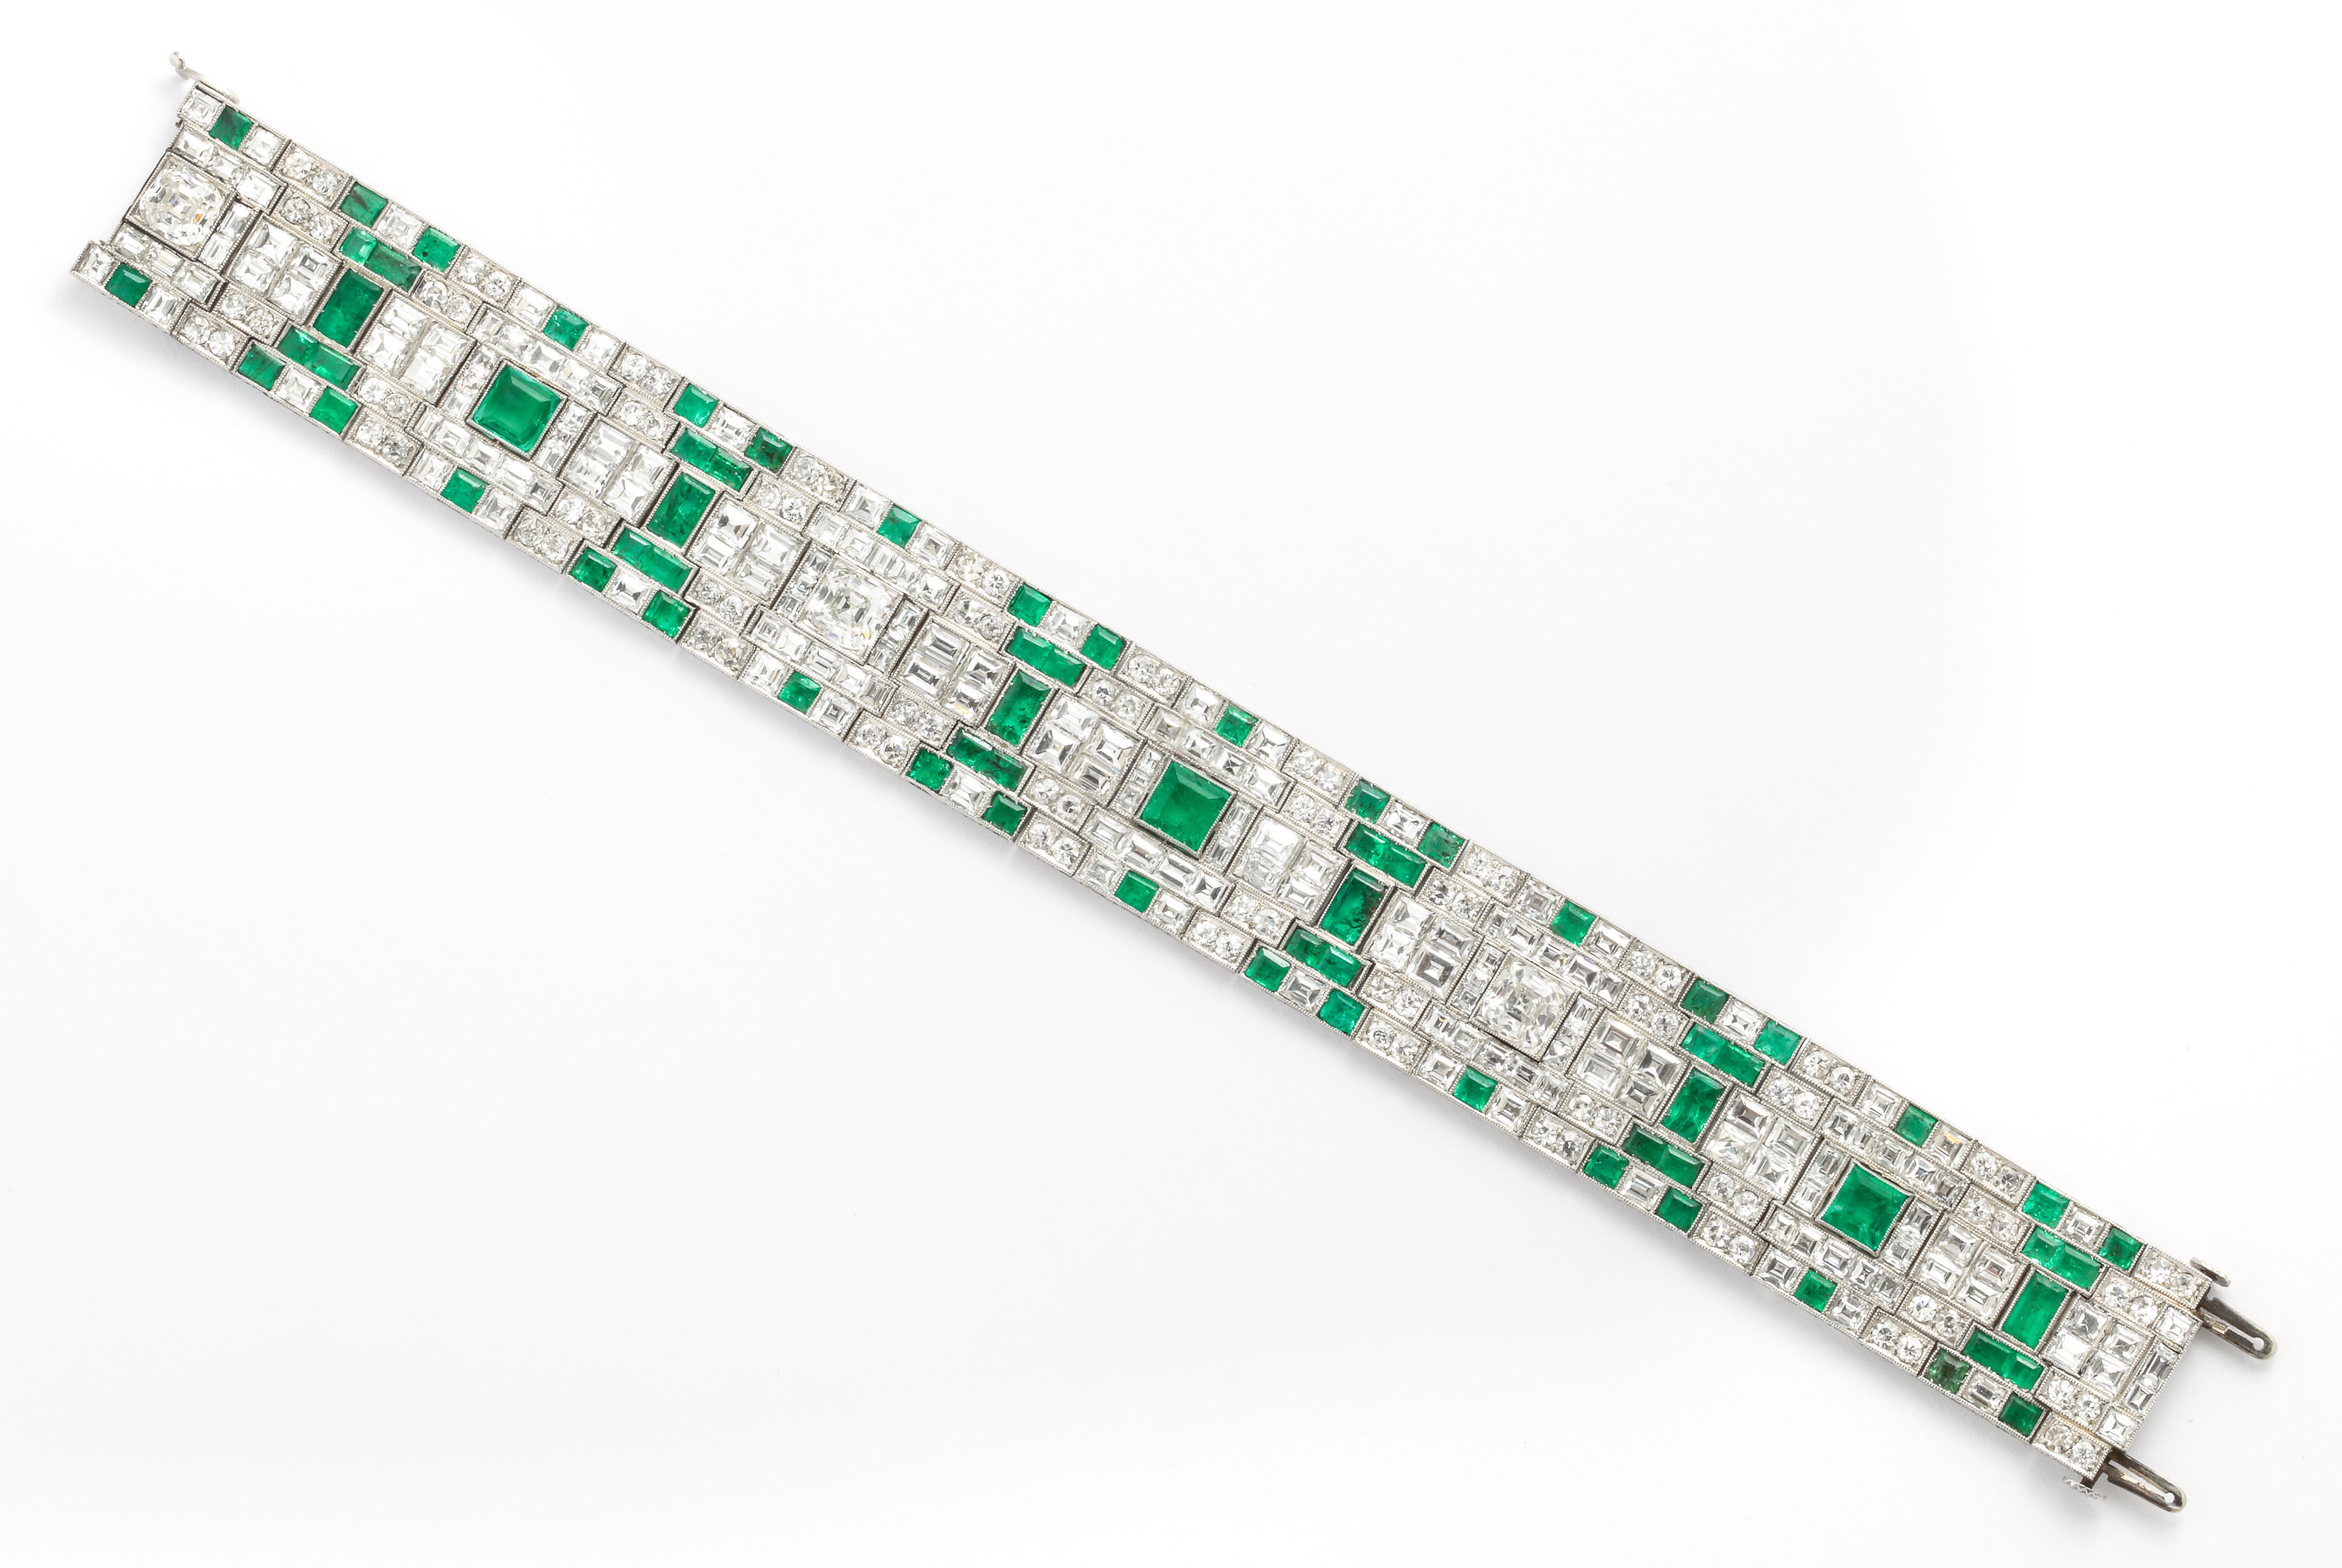 Unusual for it's interesting pattern and use of square cut emeralds, this art deco era bracelet is just the right width for wearing alone or stacking.  The composition pairs bright green square and baguette cut emeralds, most likely of Colombian